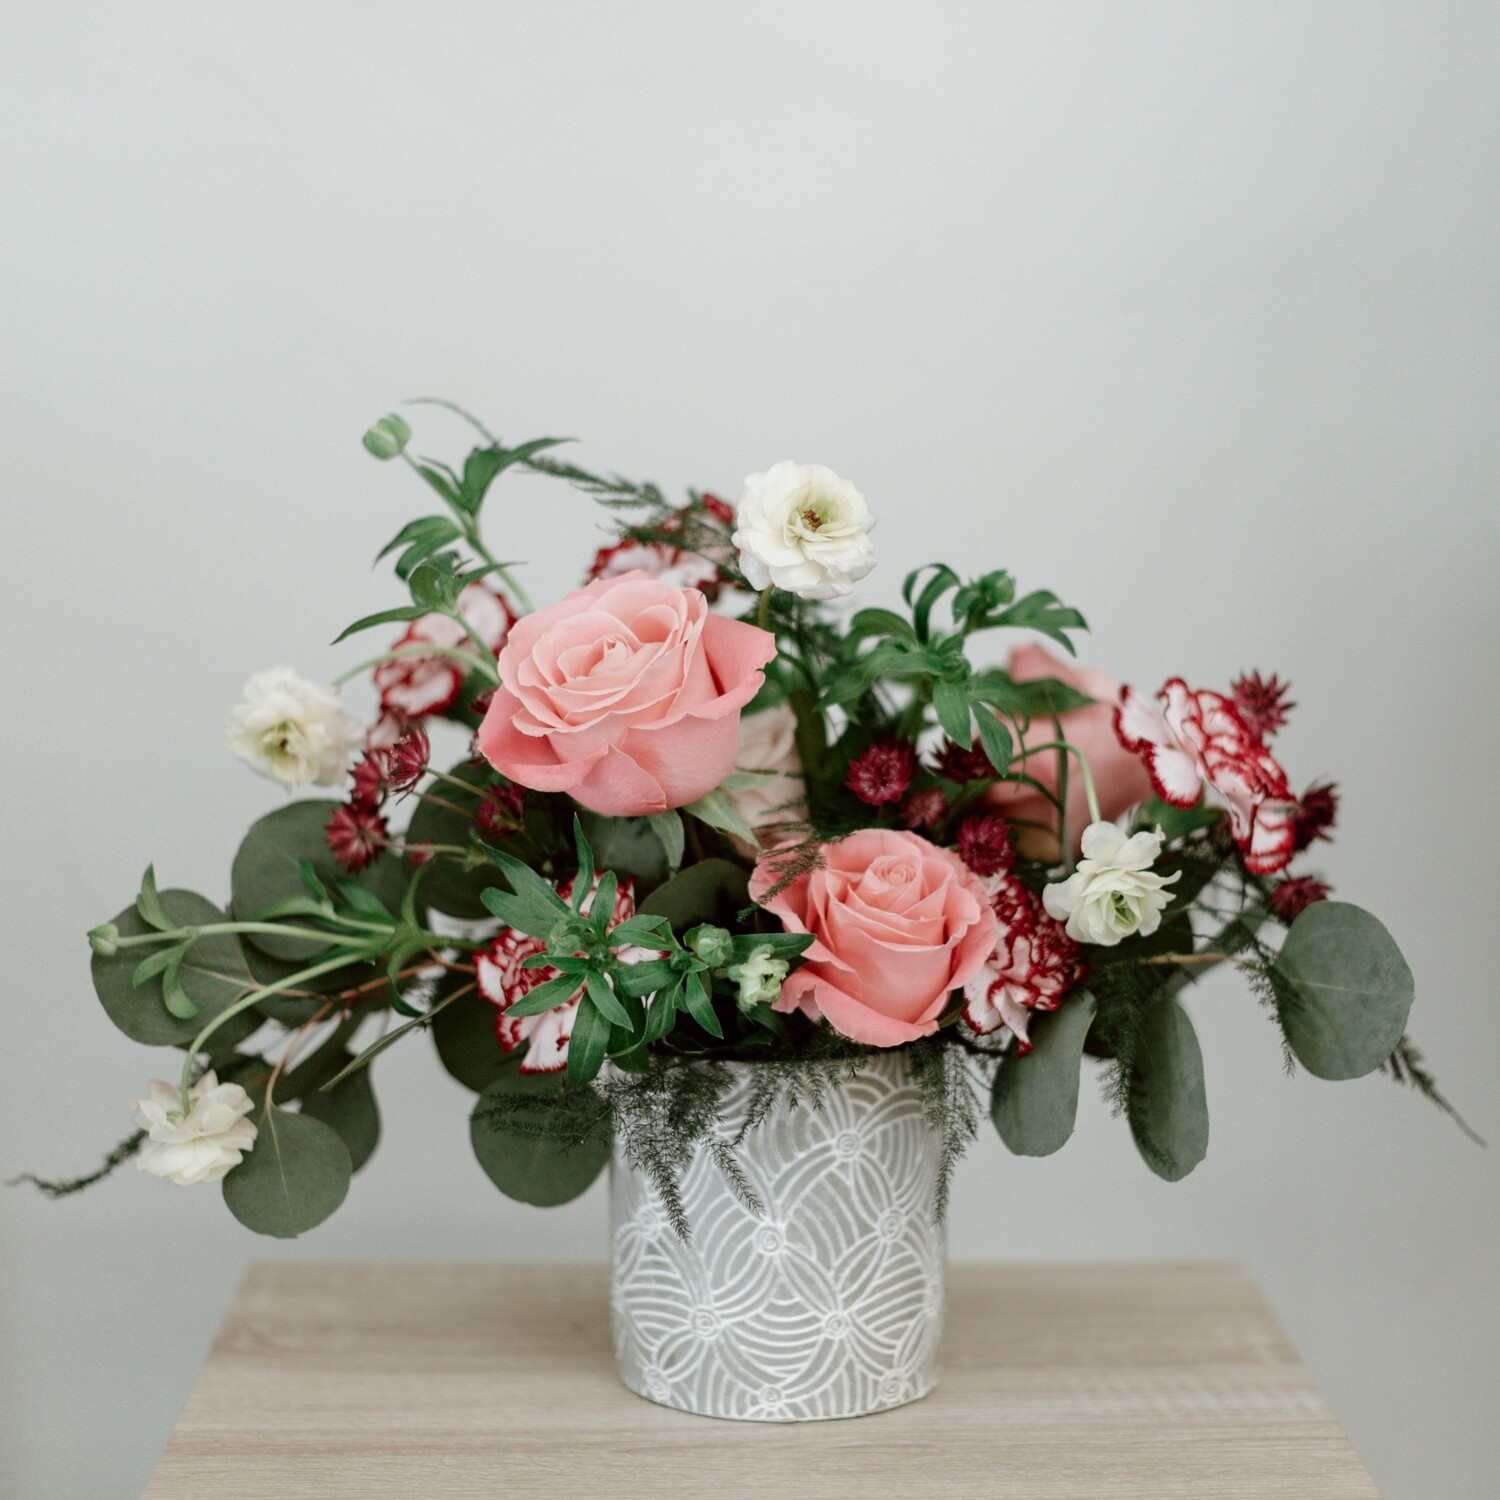 Custom Floral Delivery - Posh Sprout